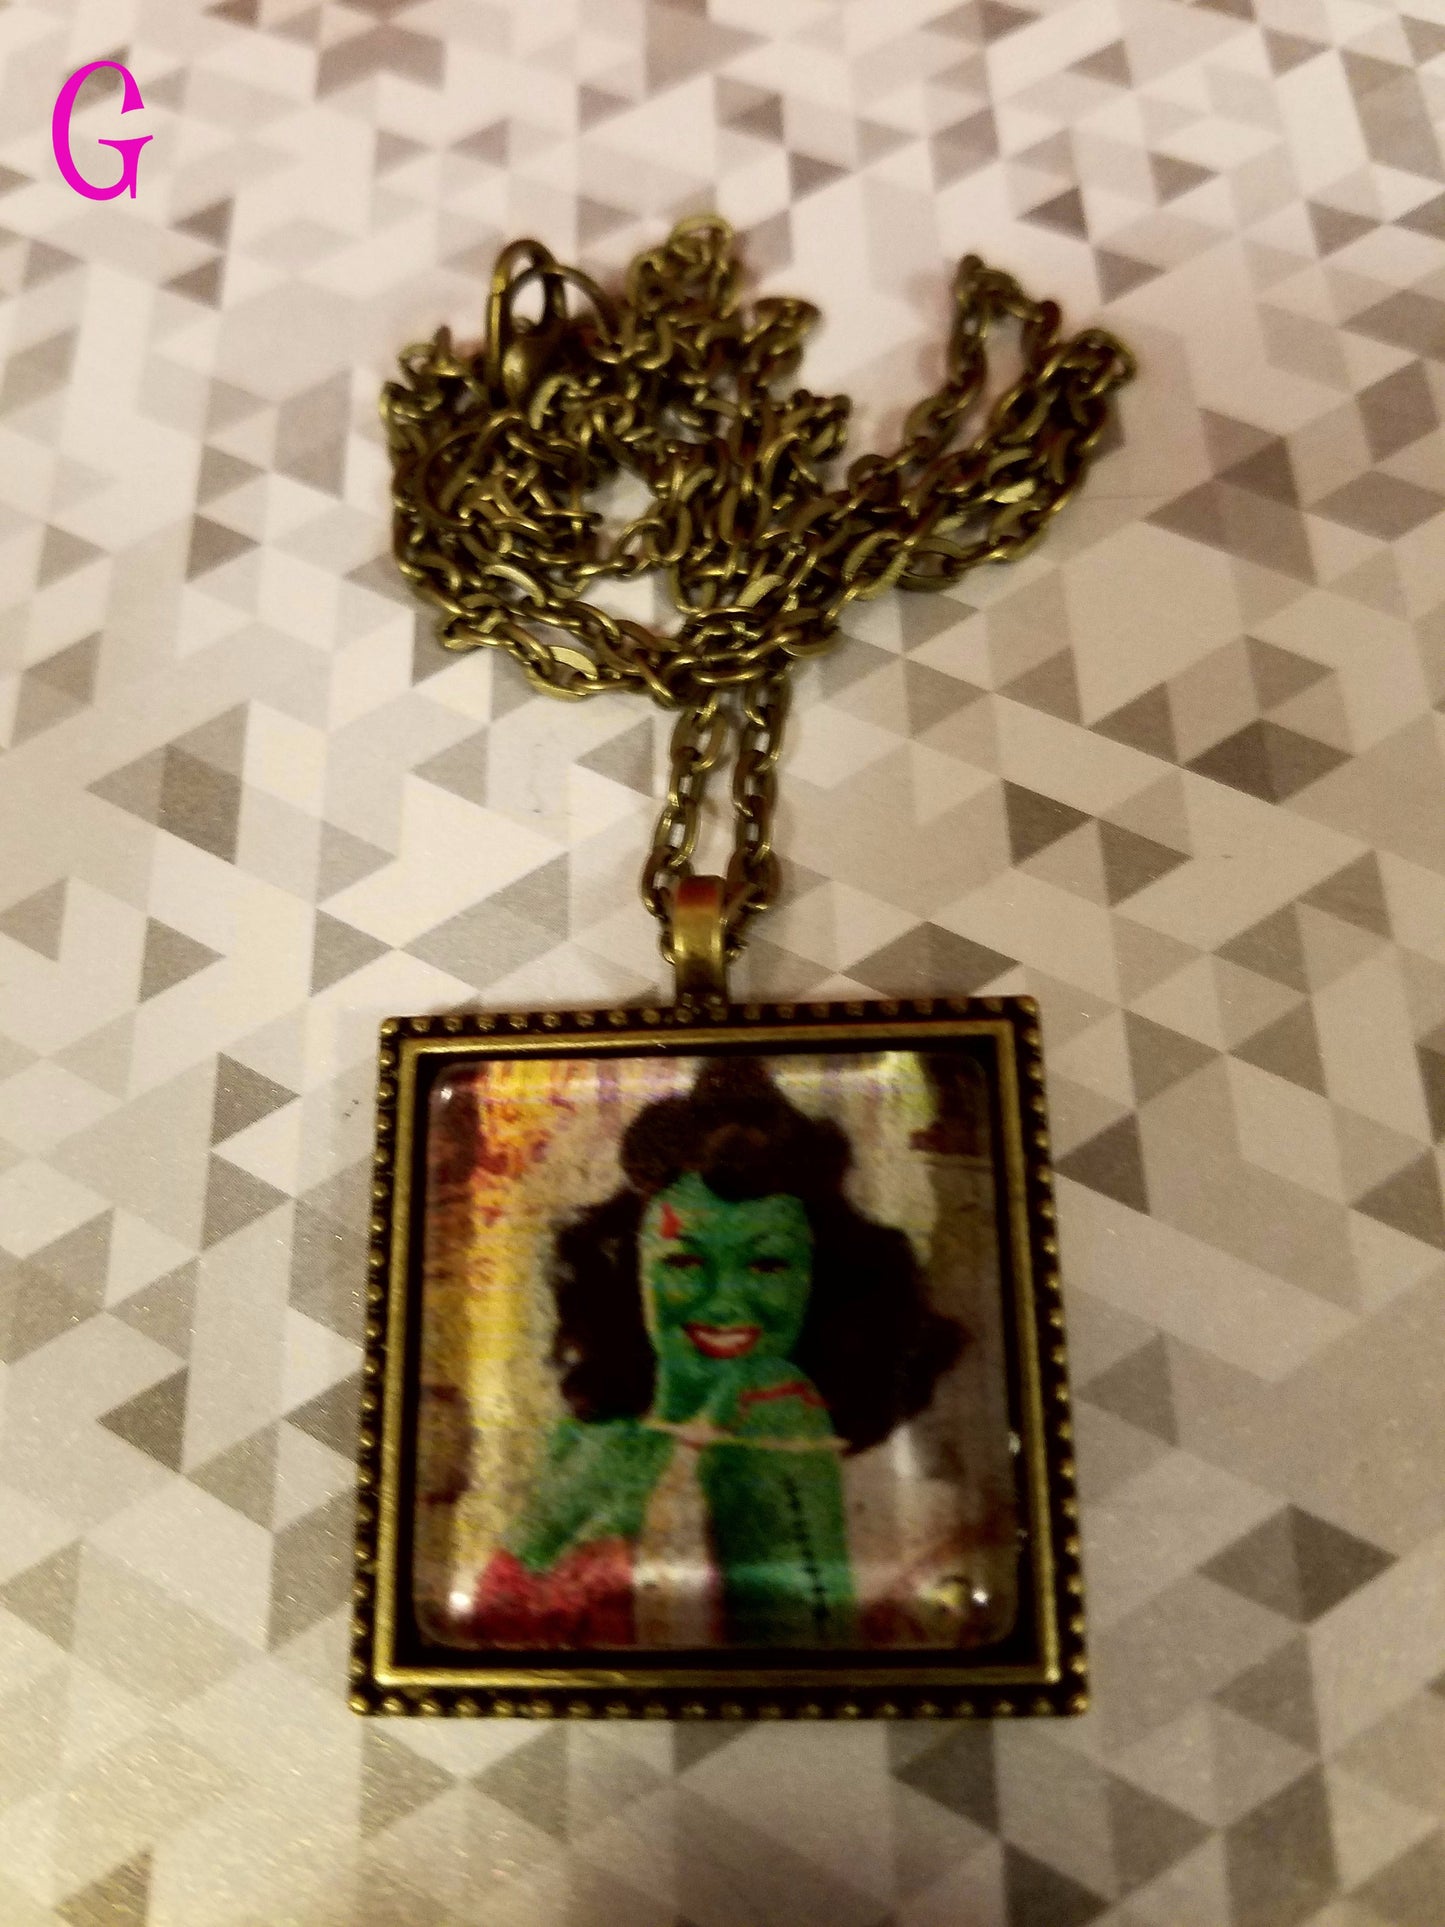 Zombie Pin Up Girl Cabochon Necklace